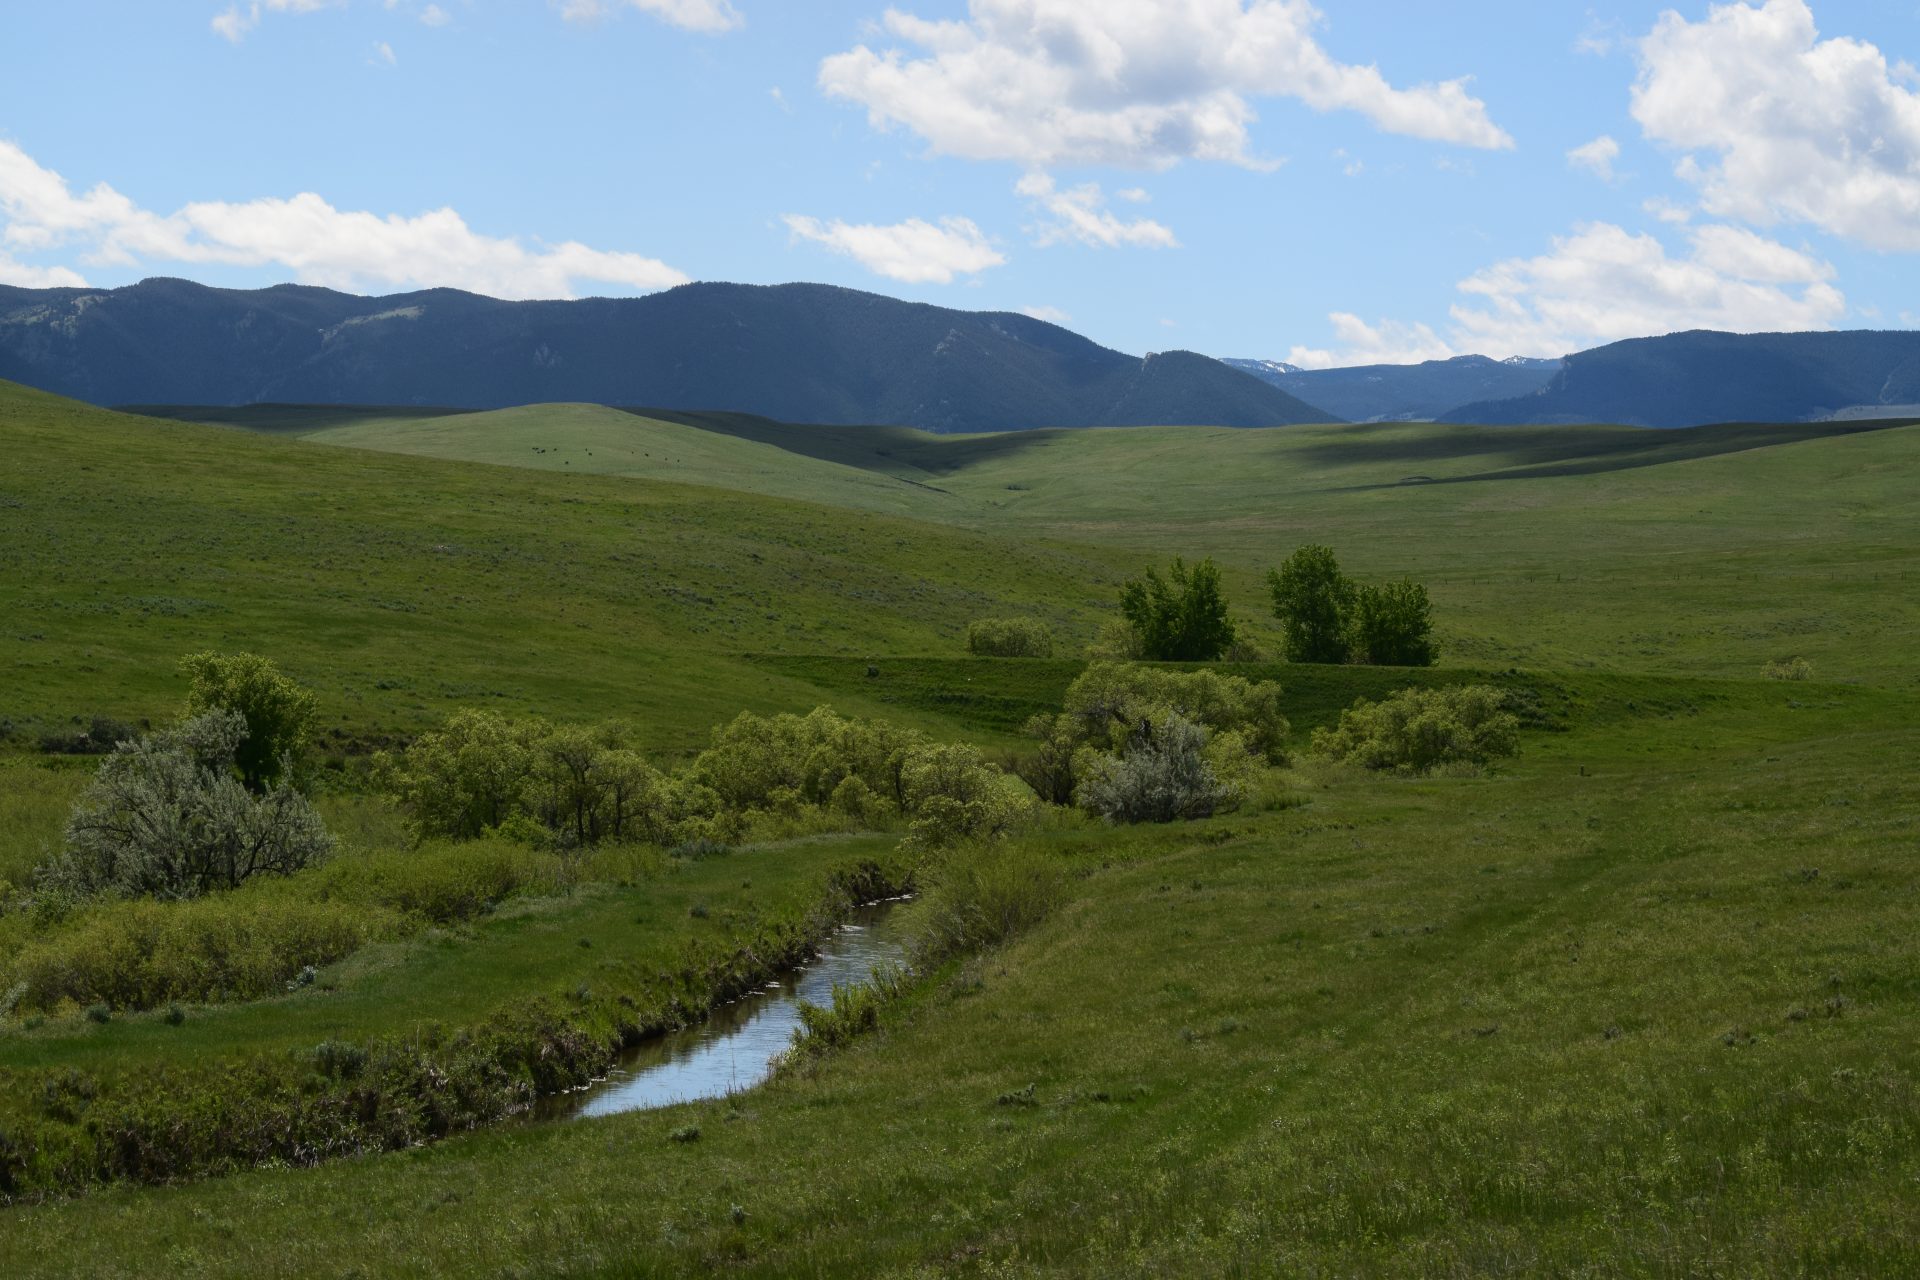 Bighorn Mountains Foothill Land for Sale